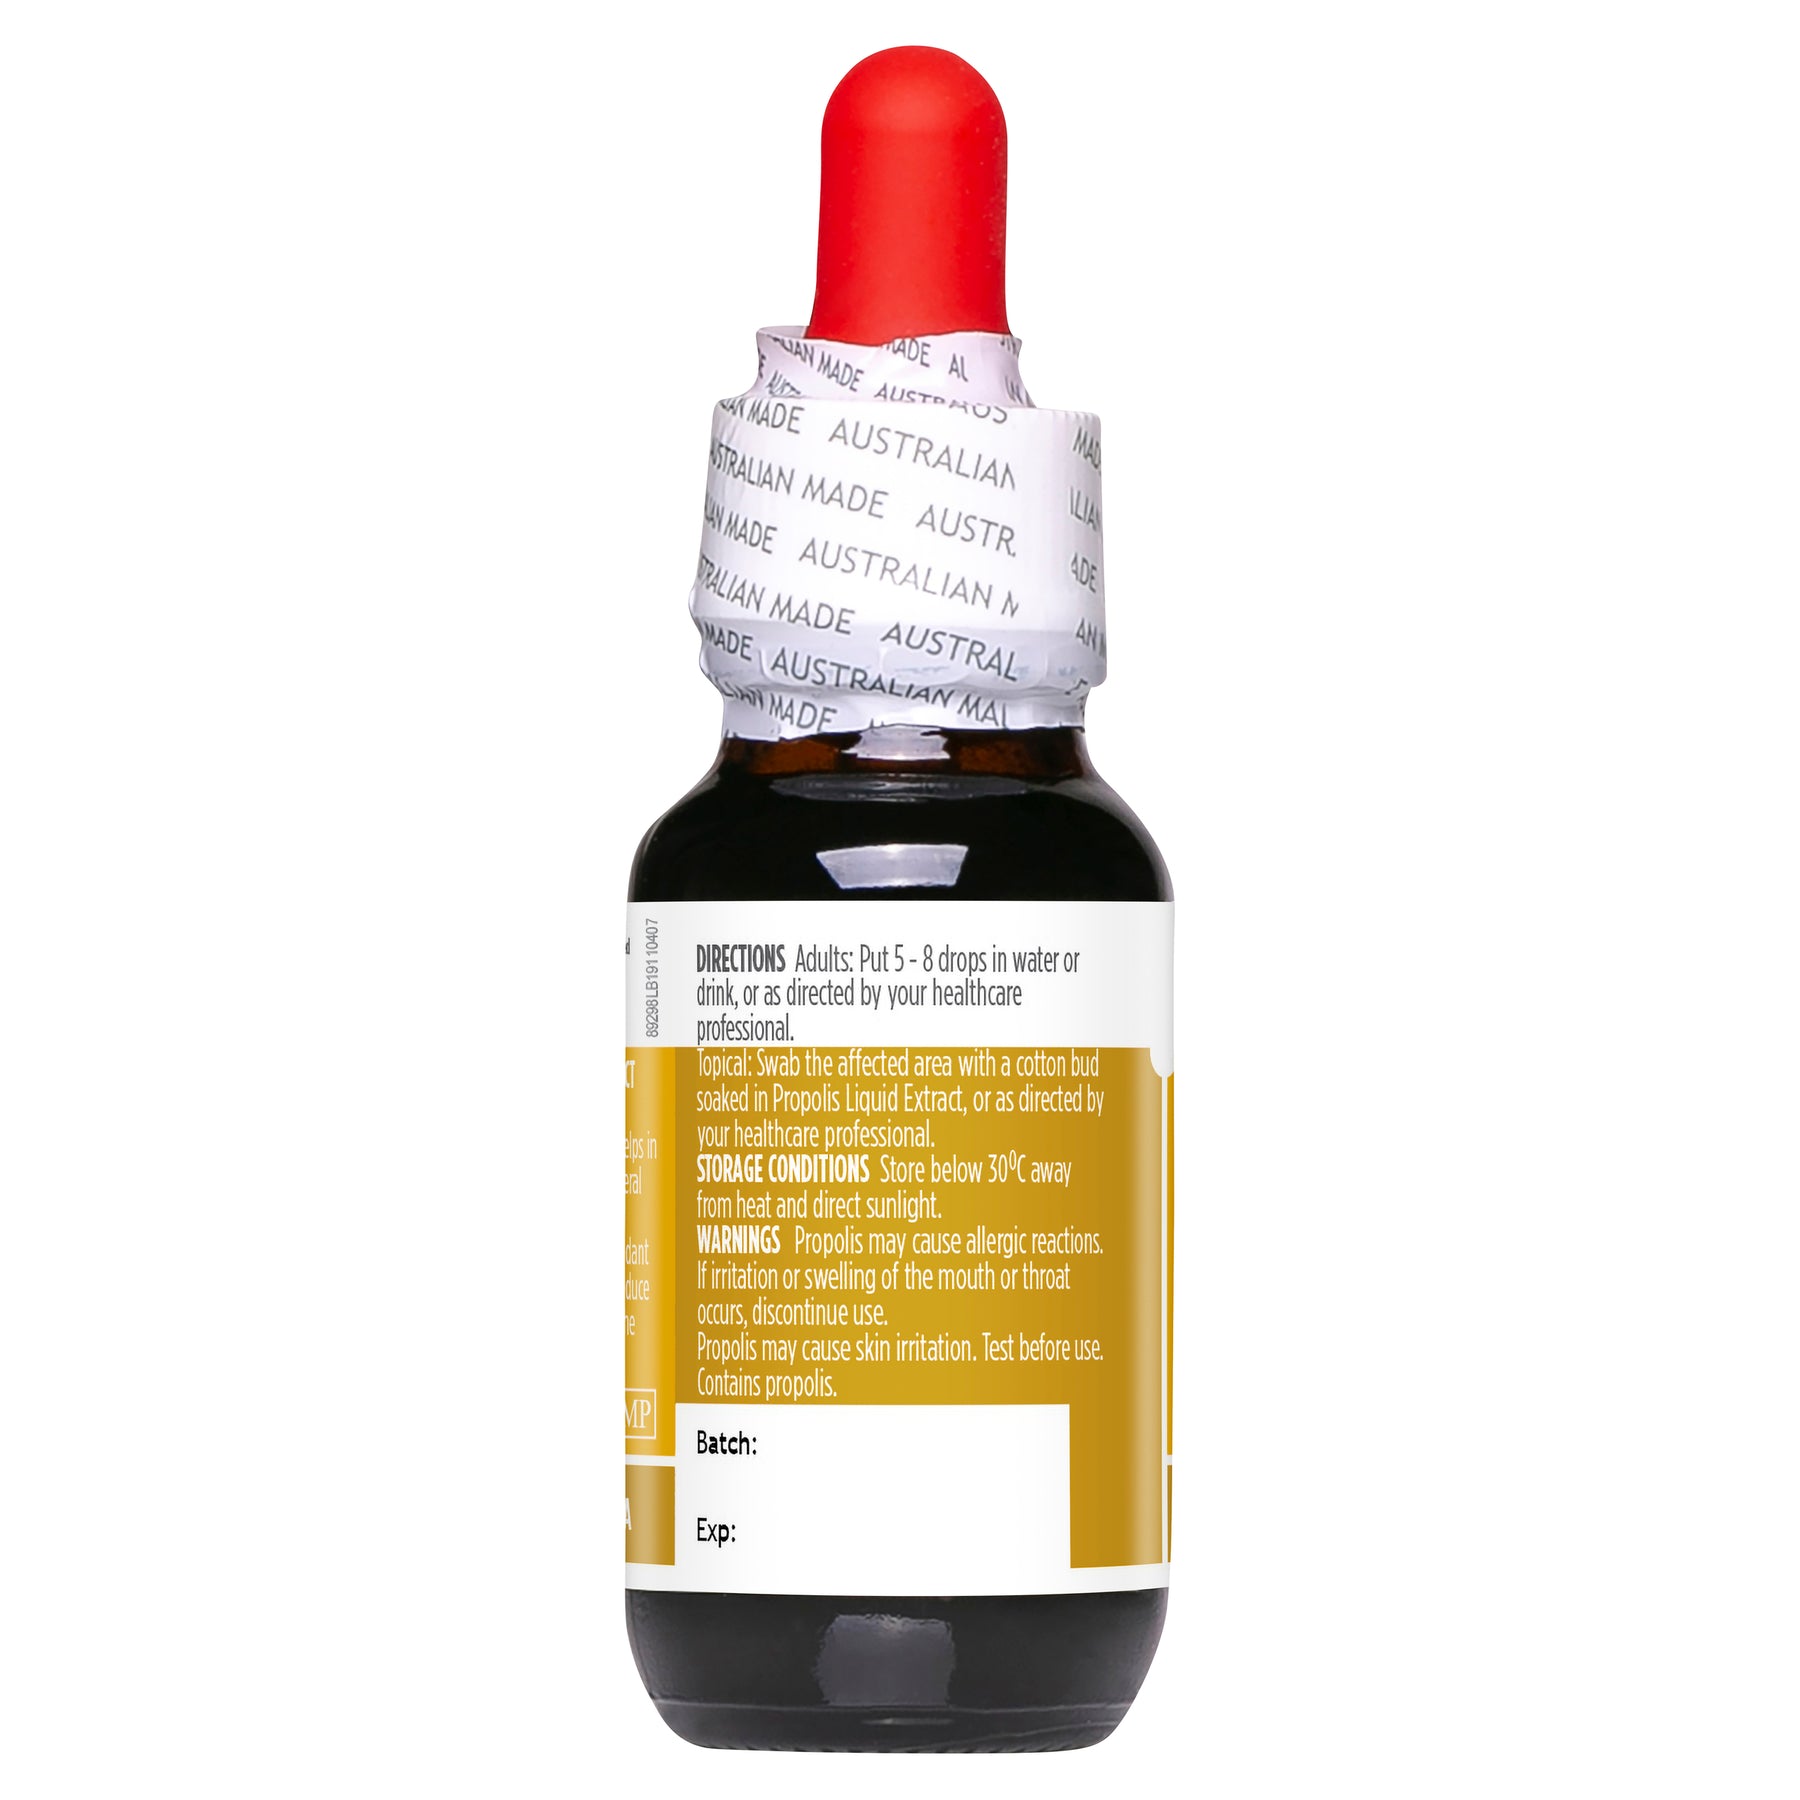 Label Showing Directions, Storage and Warnings of Propolis Liquid Extract Alcohol Free-Healthy Care Australia